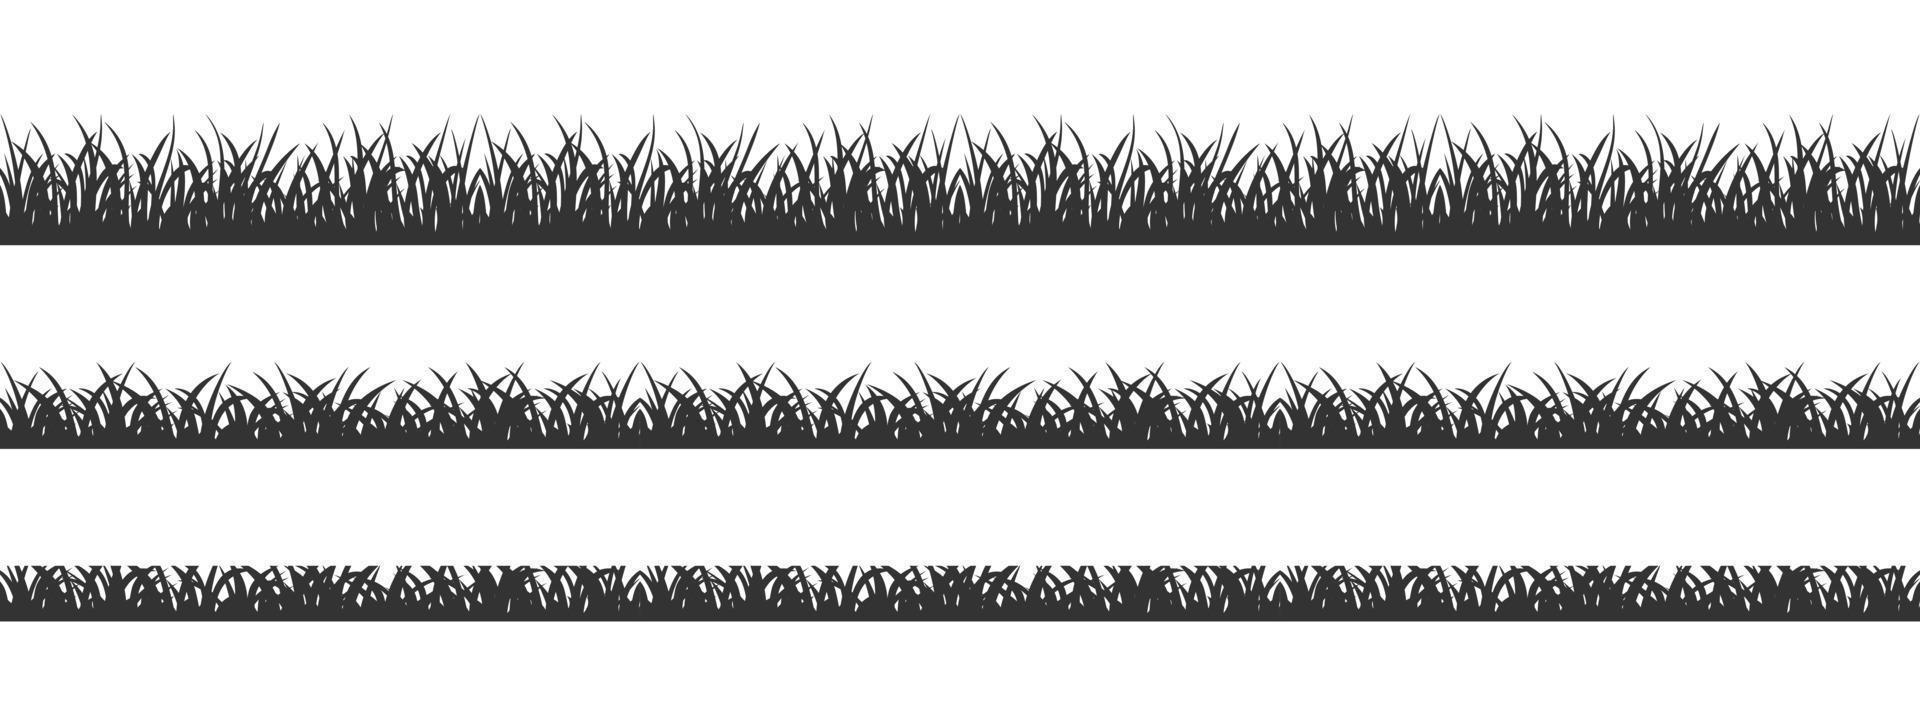 Black seamless silhouette of meadow grass on white background. vector